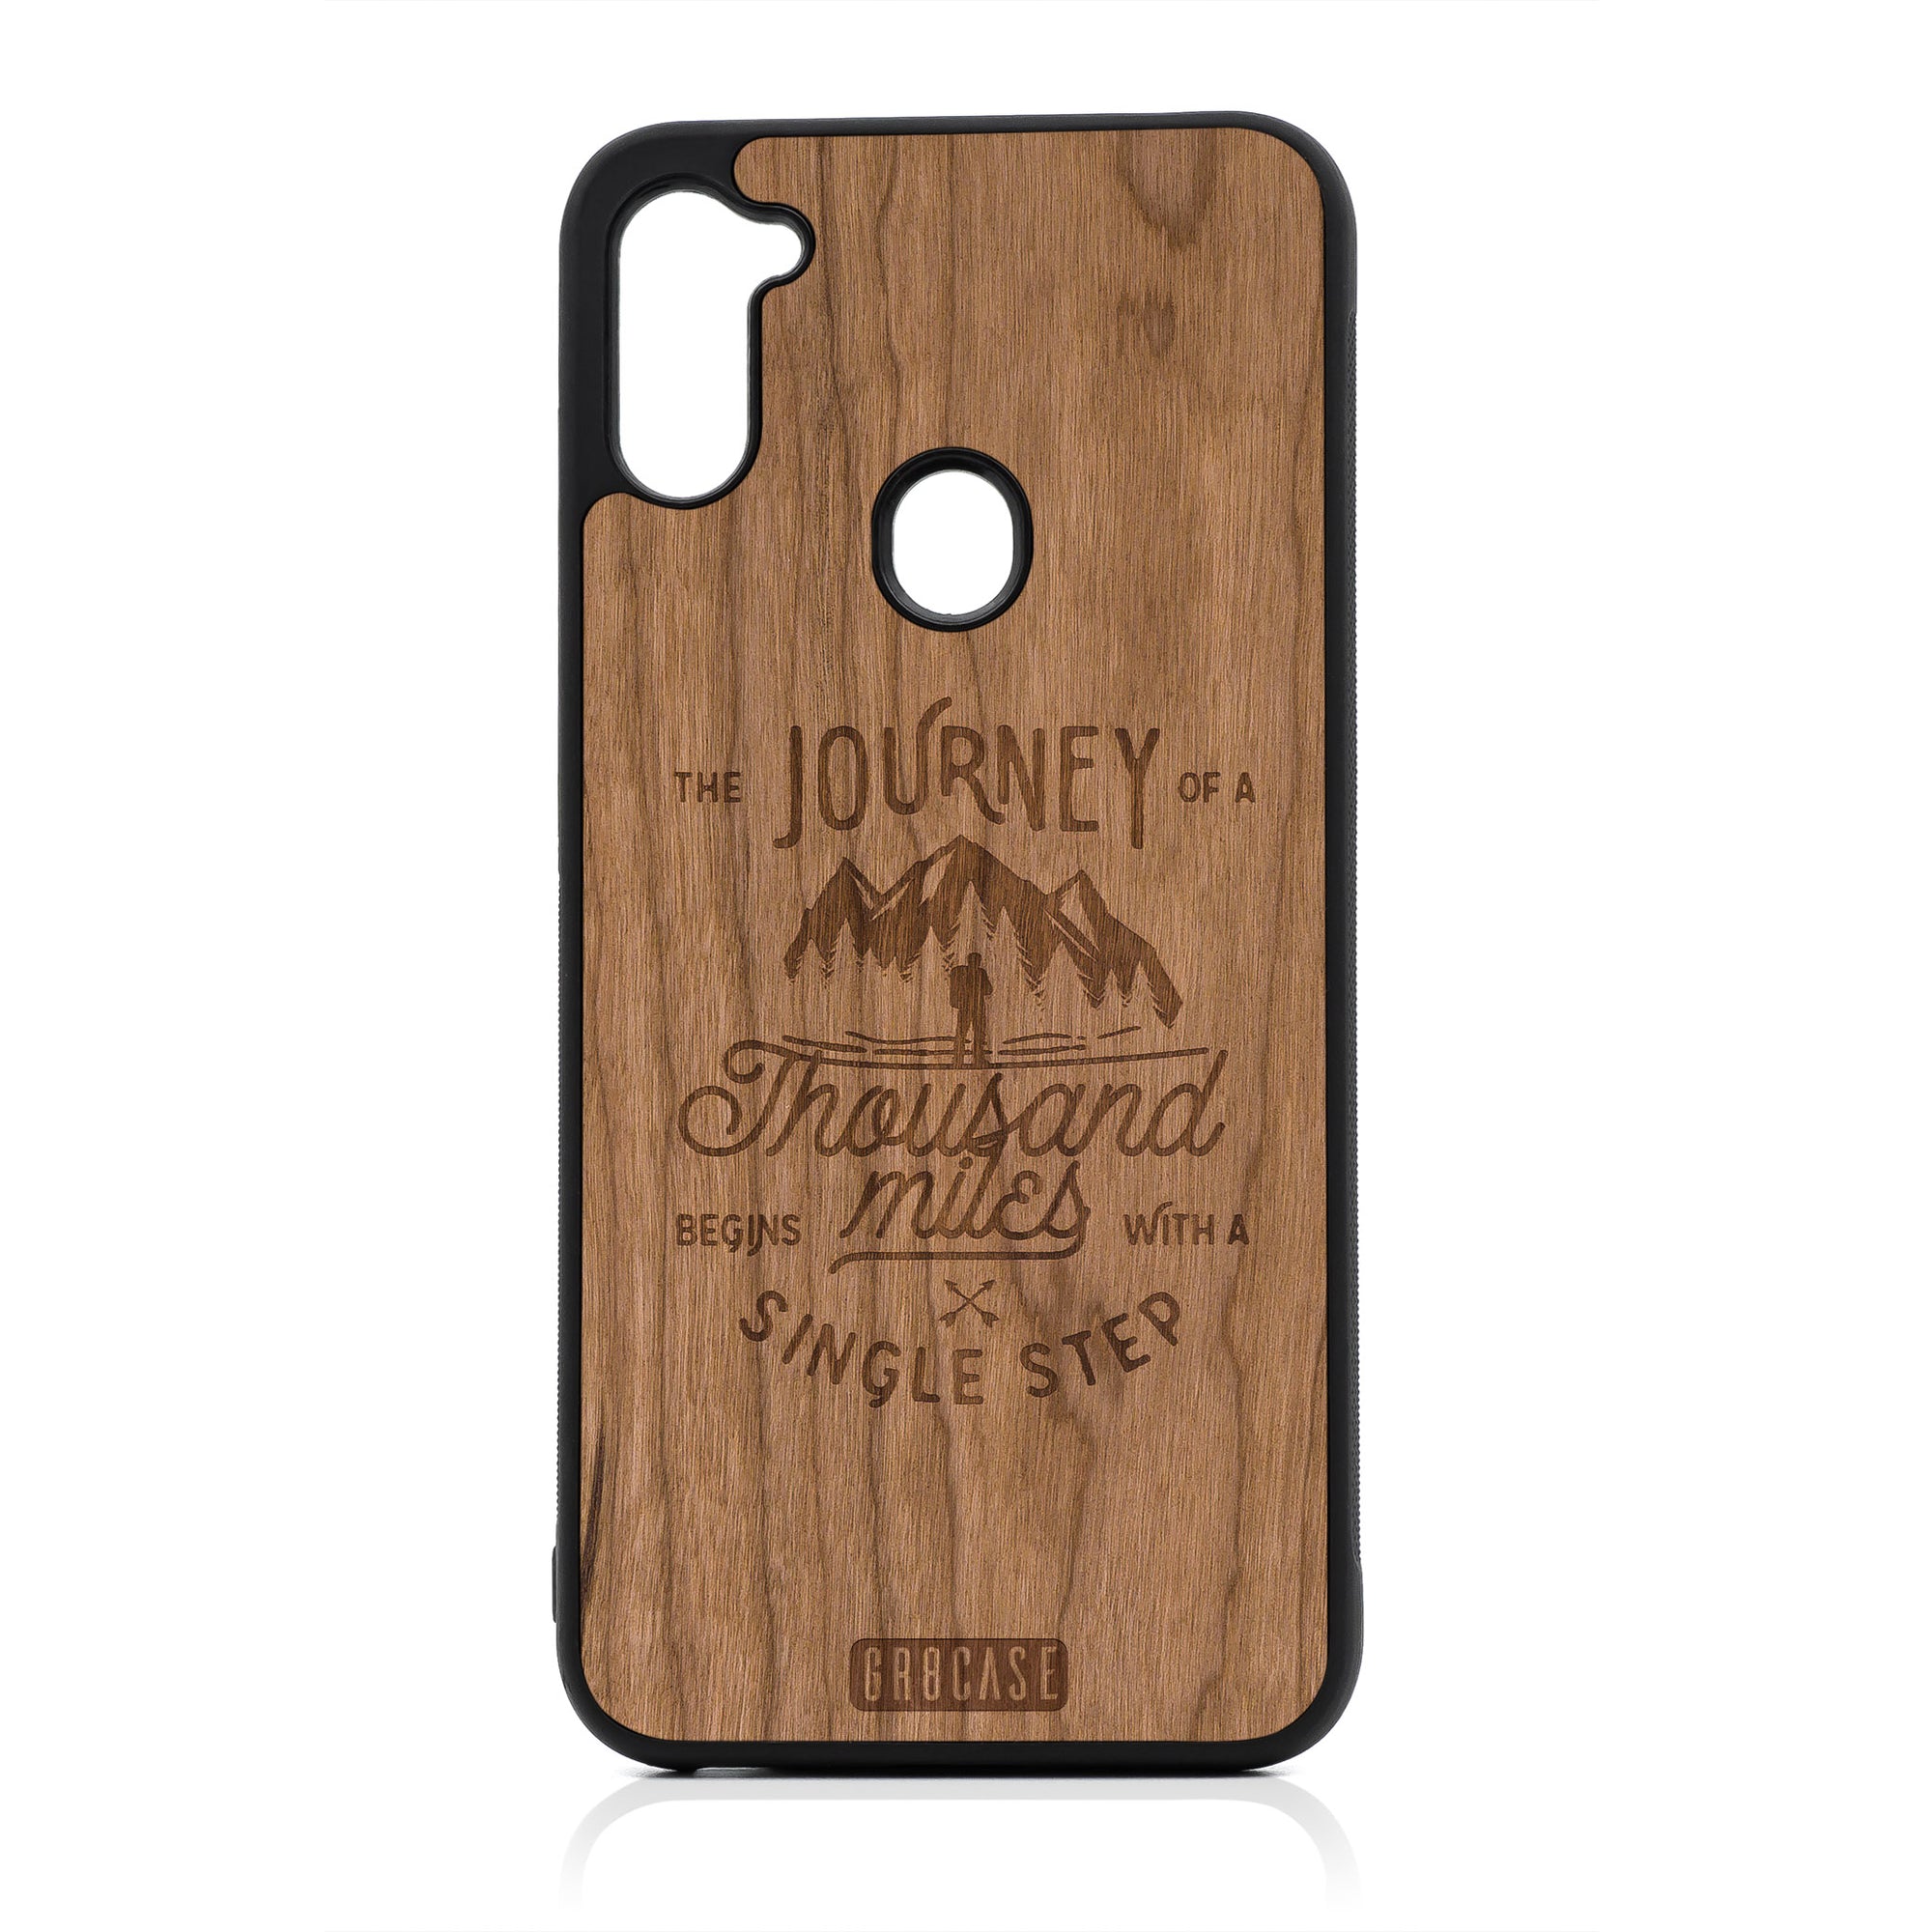 The Journey of A Thousand Miles Begins With A Single Step Design Wood Case For Samsung Galaxy A11